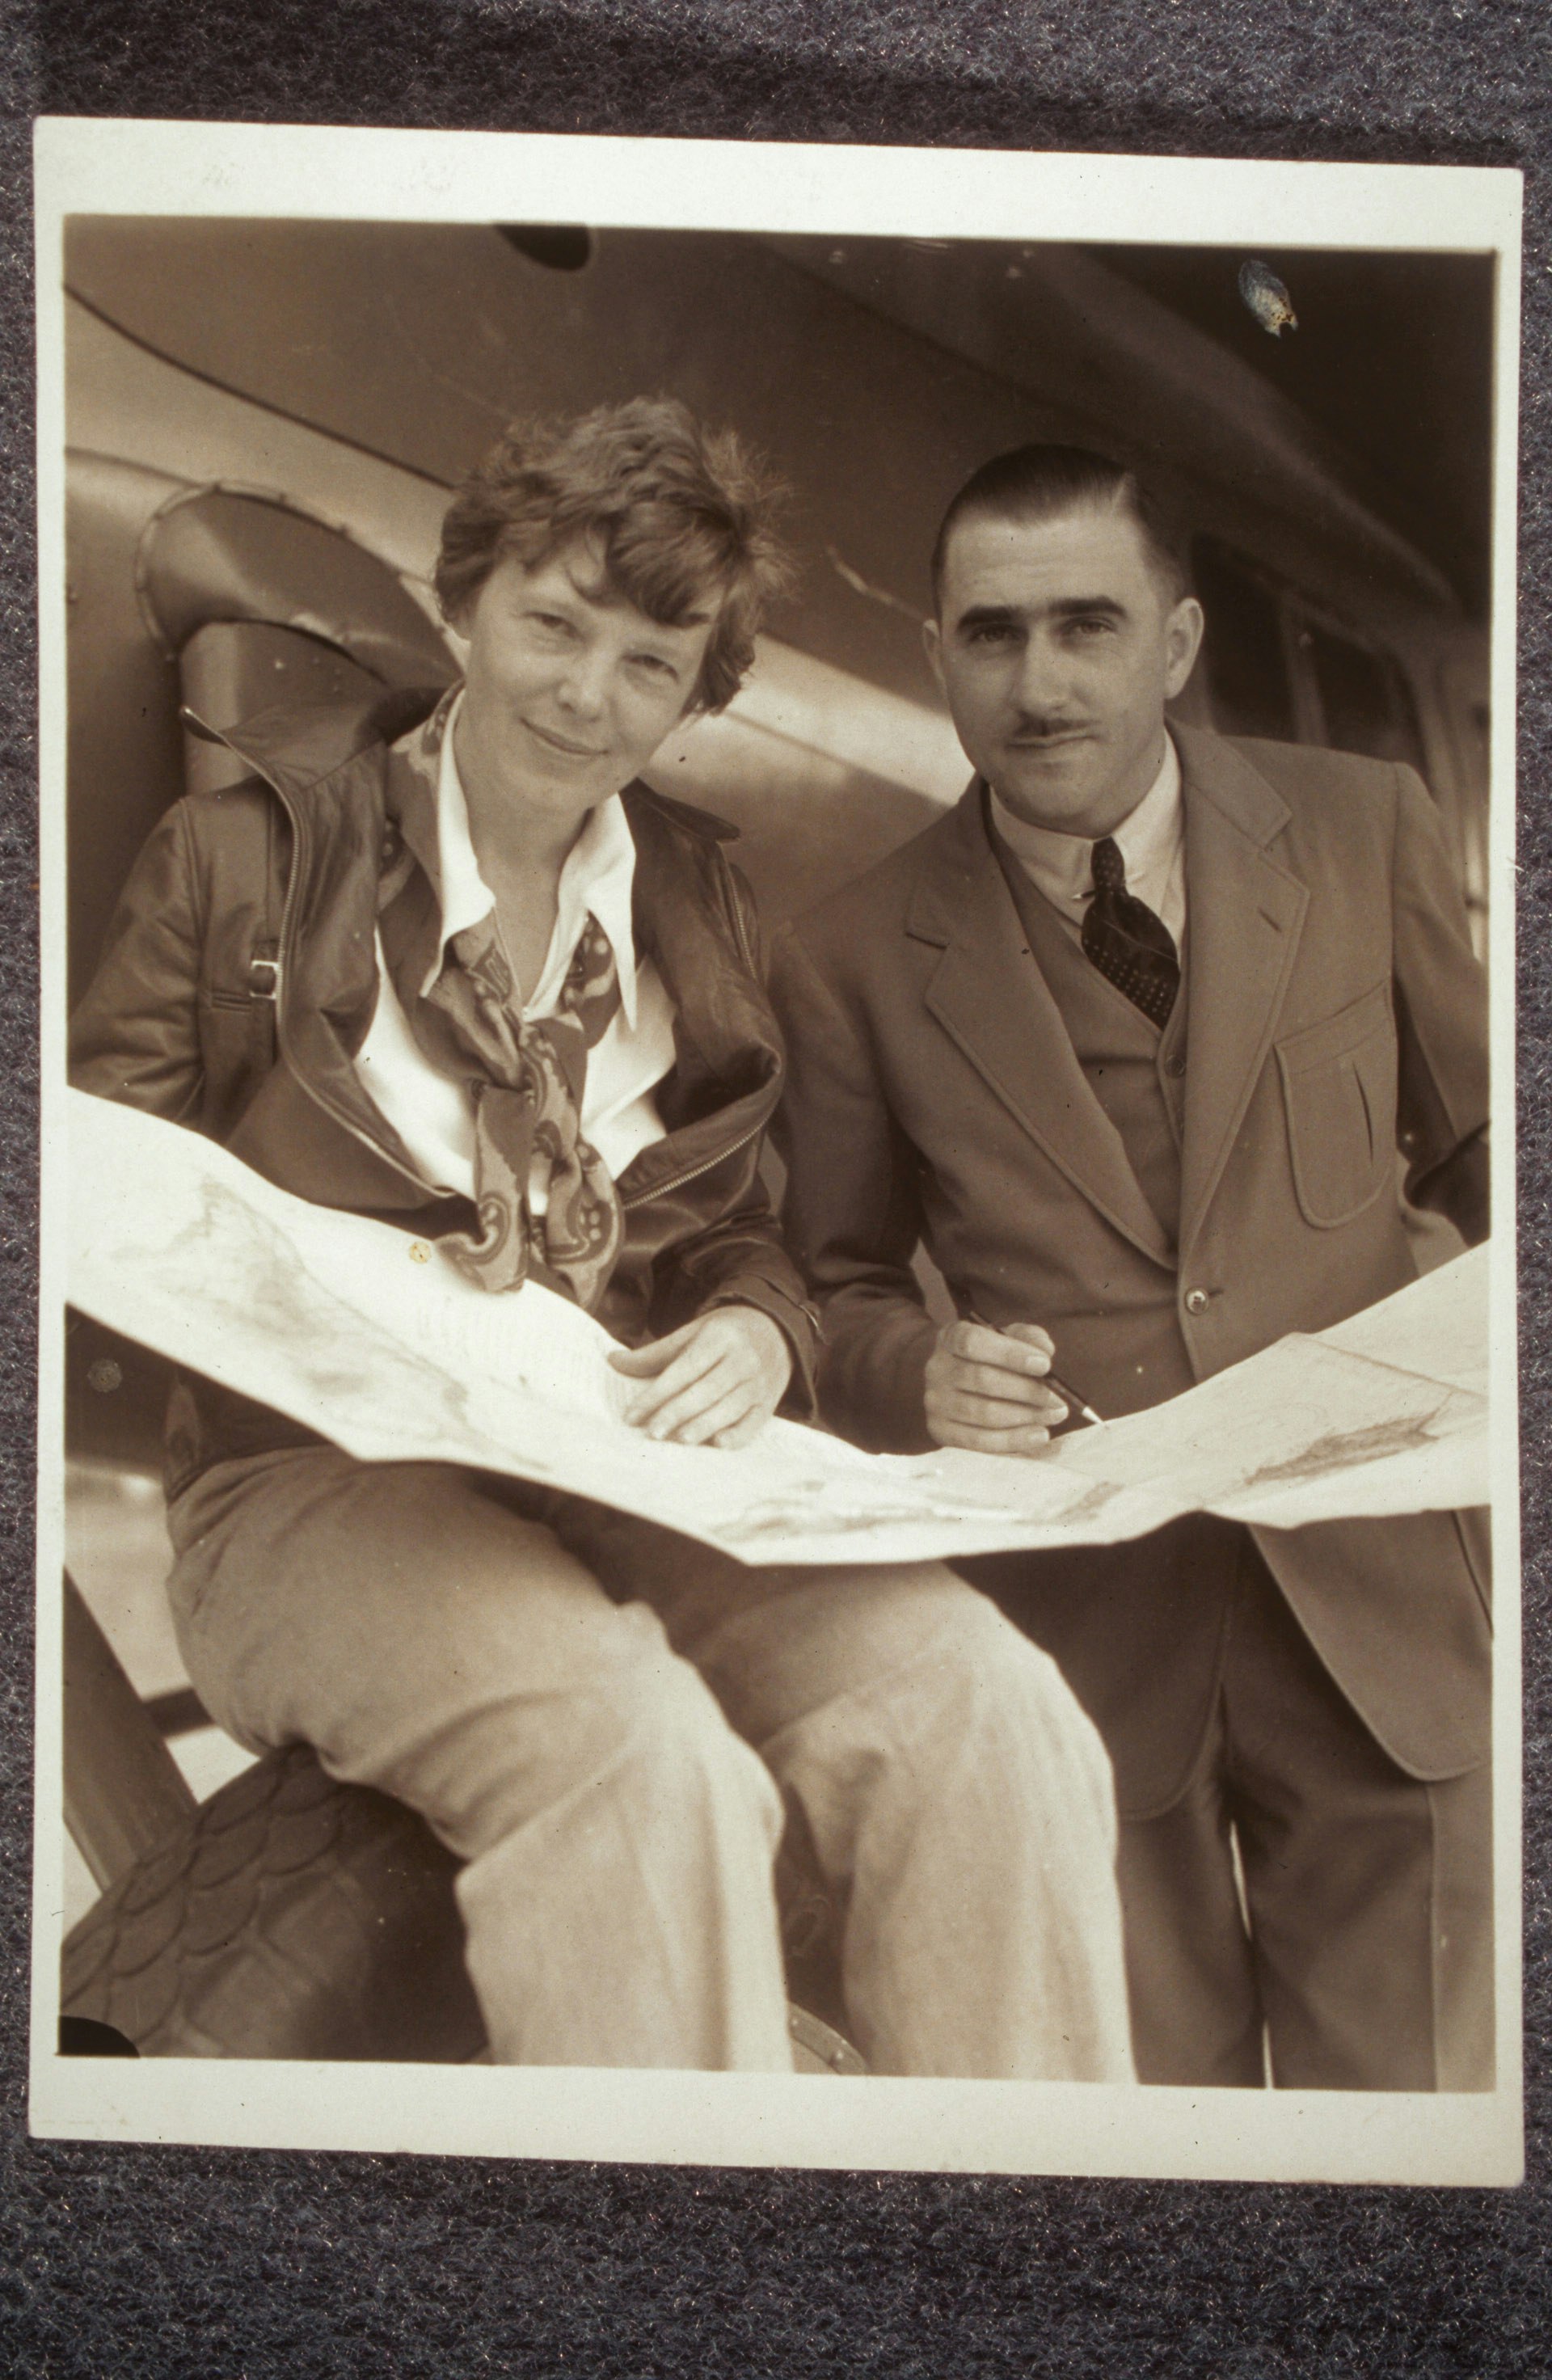 Amelia Earhart and Paul Mantz looking at a flight chart or map together